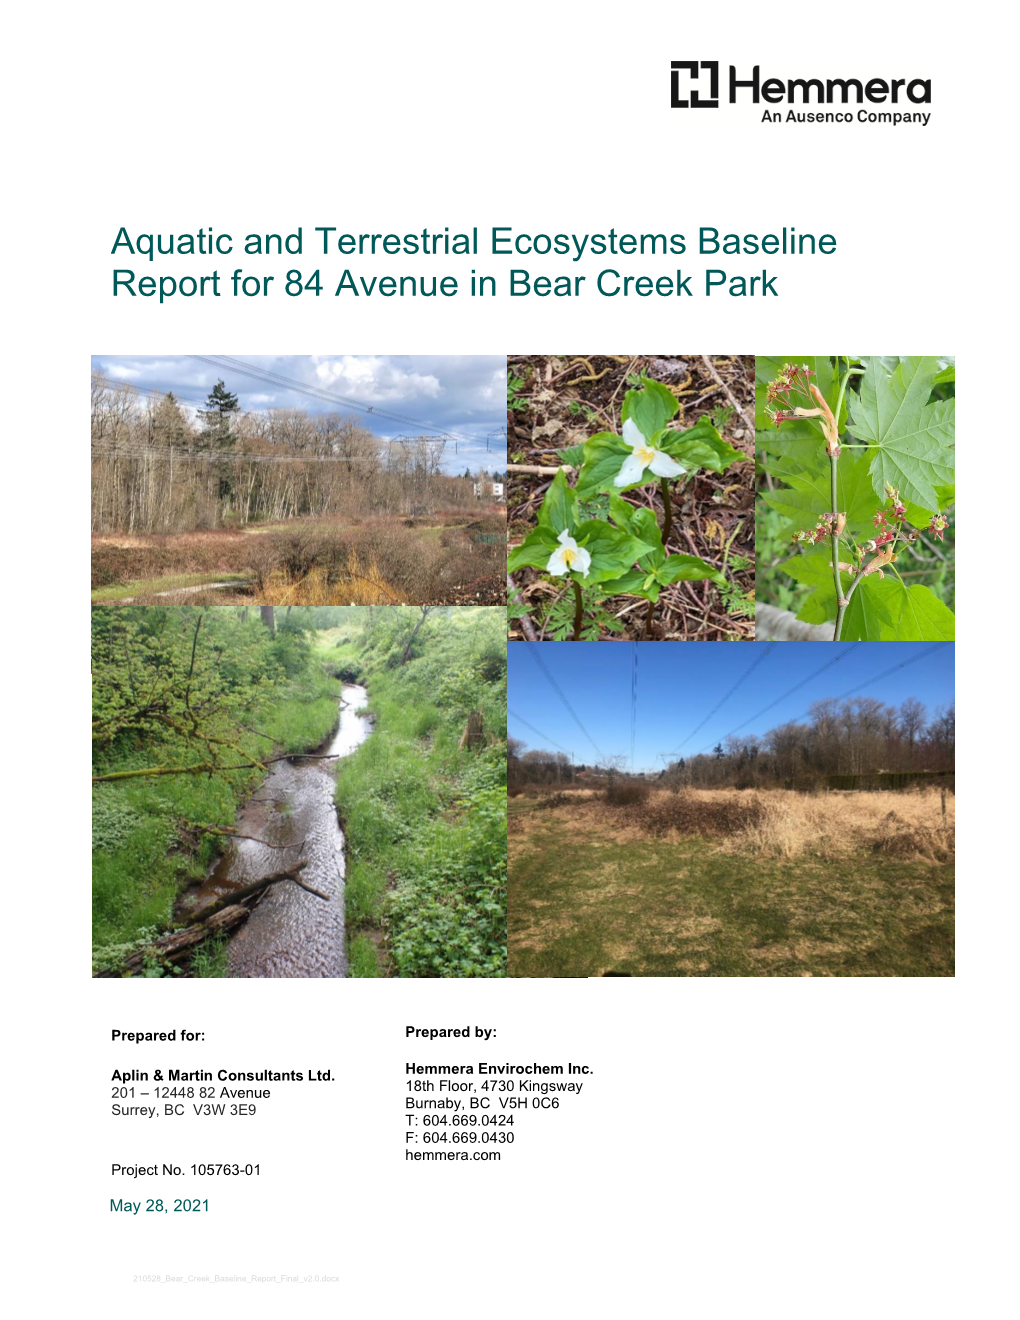 Aquatic and Terrestrial Ecosystems Baseline Report for 84 Avenue in Bear Creek Park